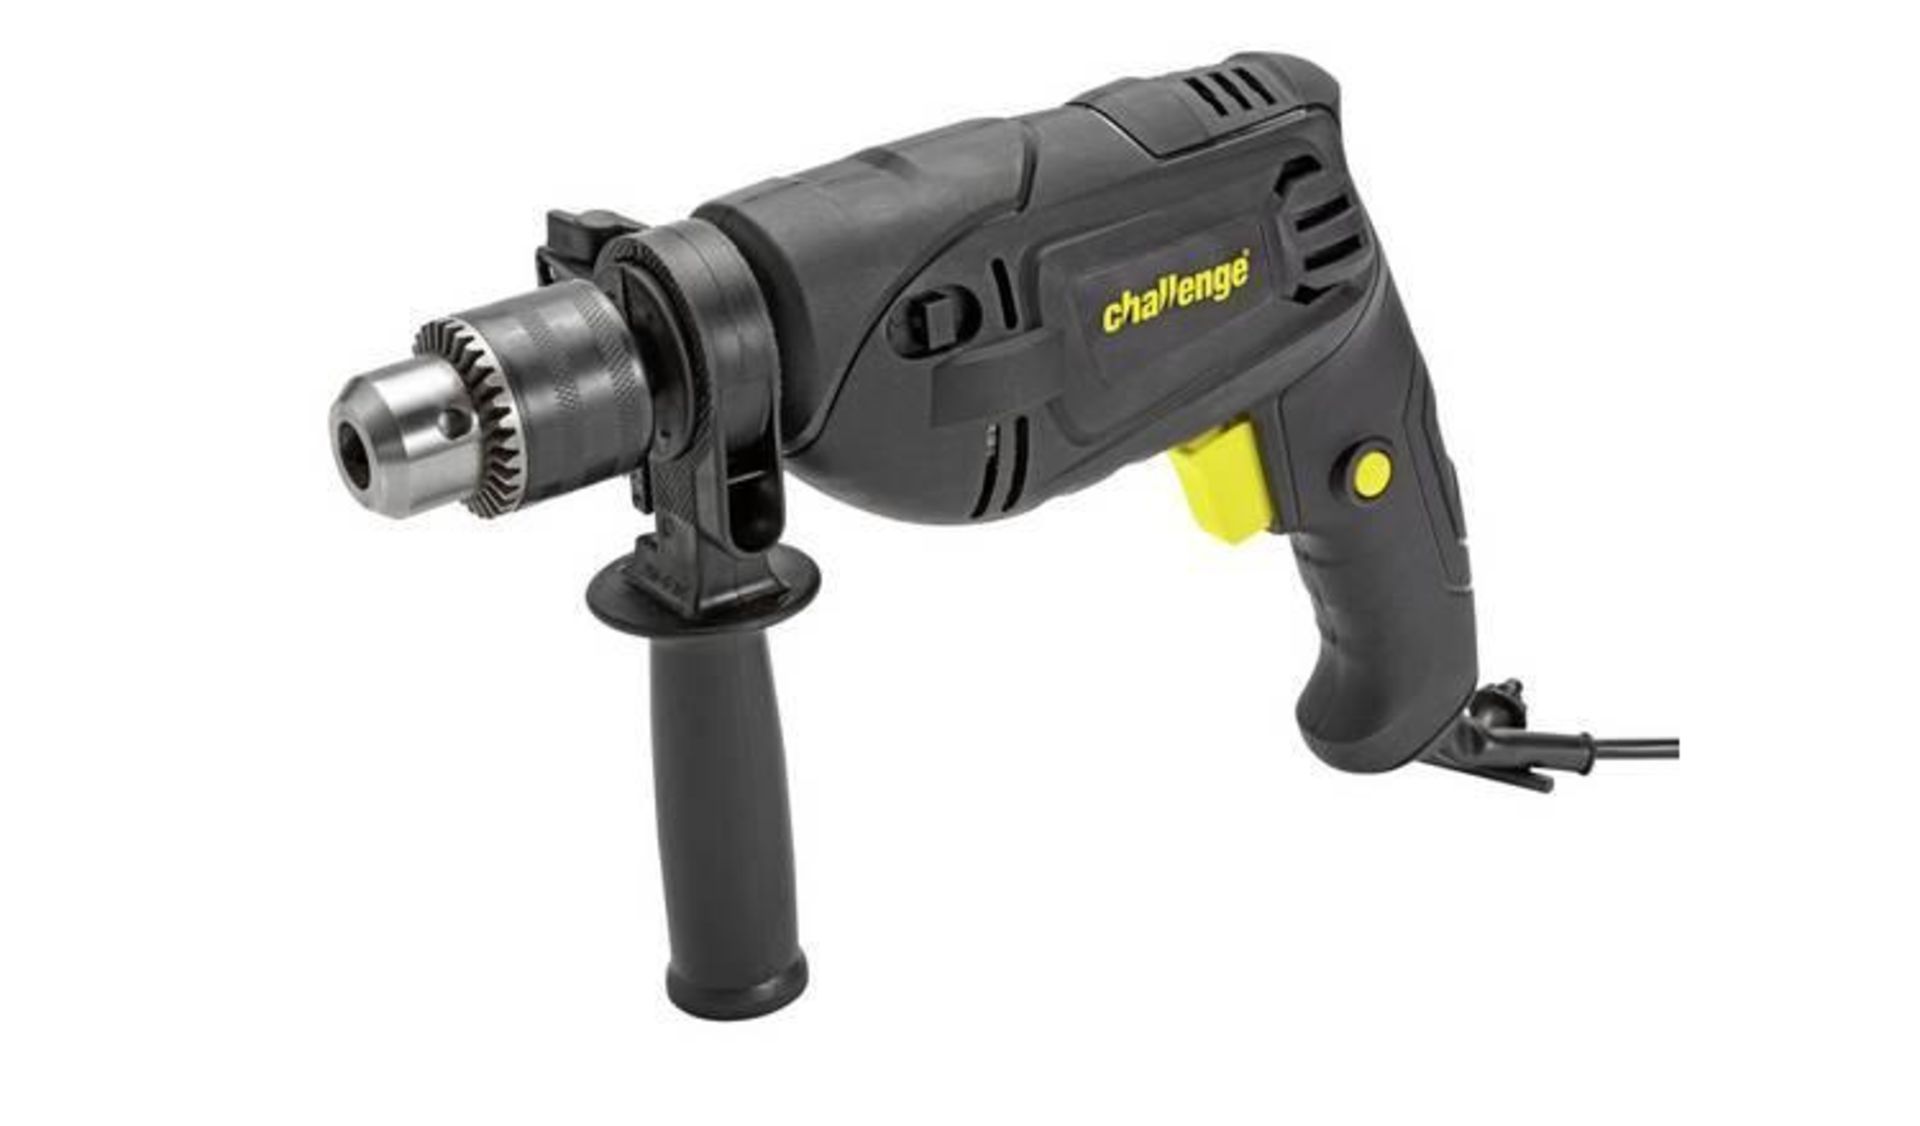 Challenge Corded Impact Drill - 500W, £15.00 RRP